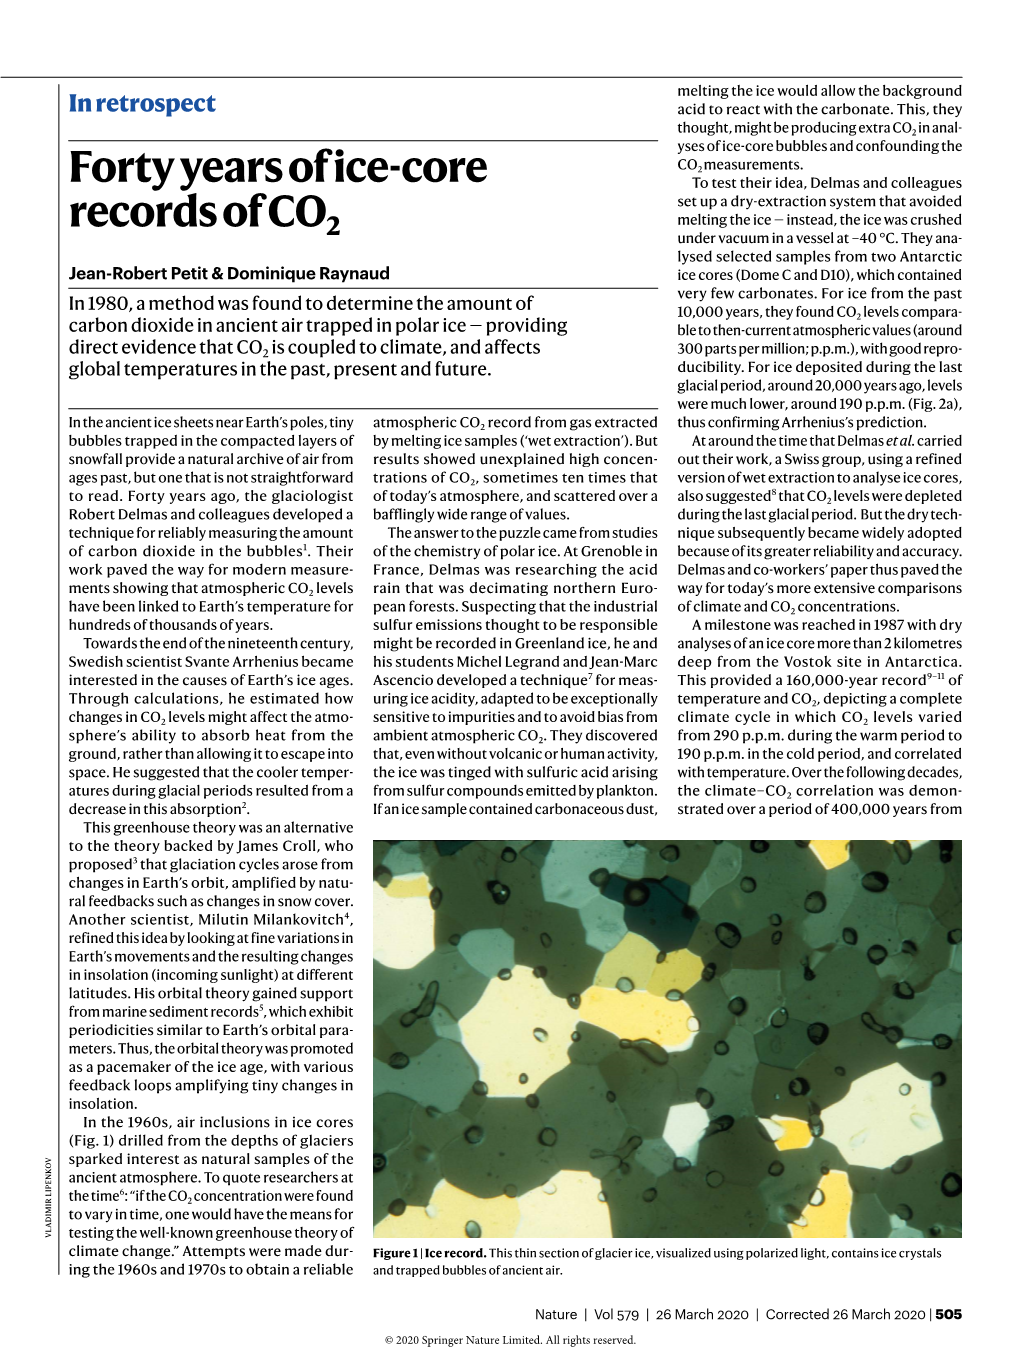 Forty Years of Ice-Core Records of CO2 Jean-Robert Petit & Dominique Raynaud an Earlier Version of This Article Incorrectly Credited the Image in Figure 1